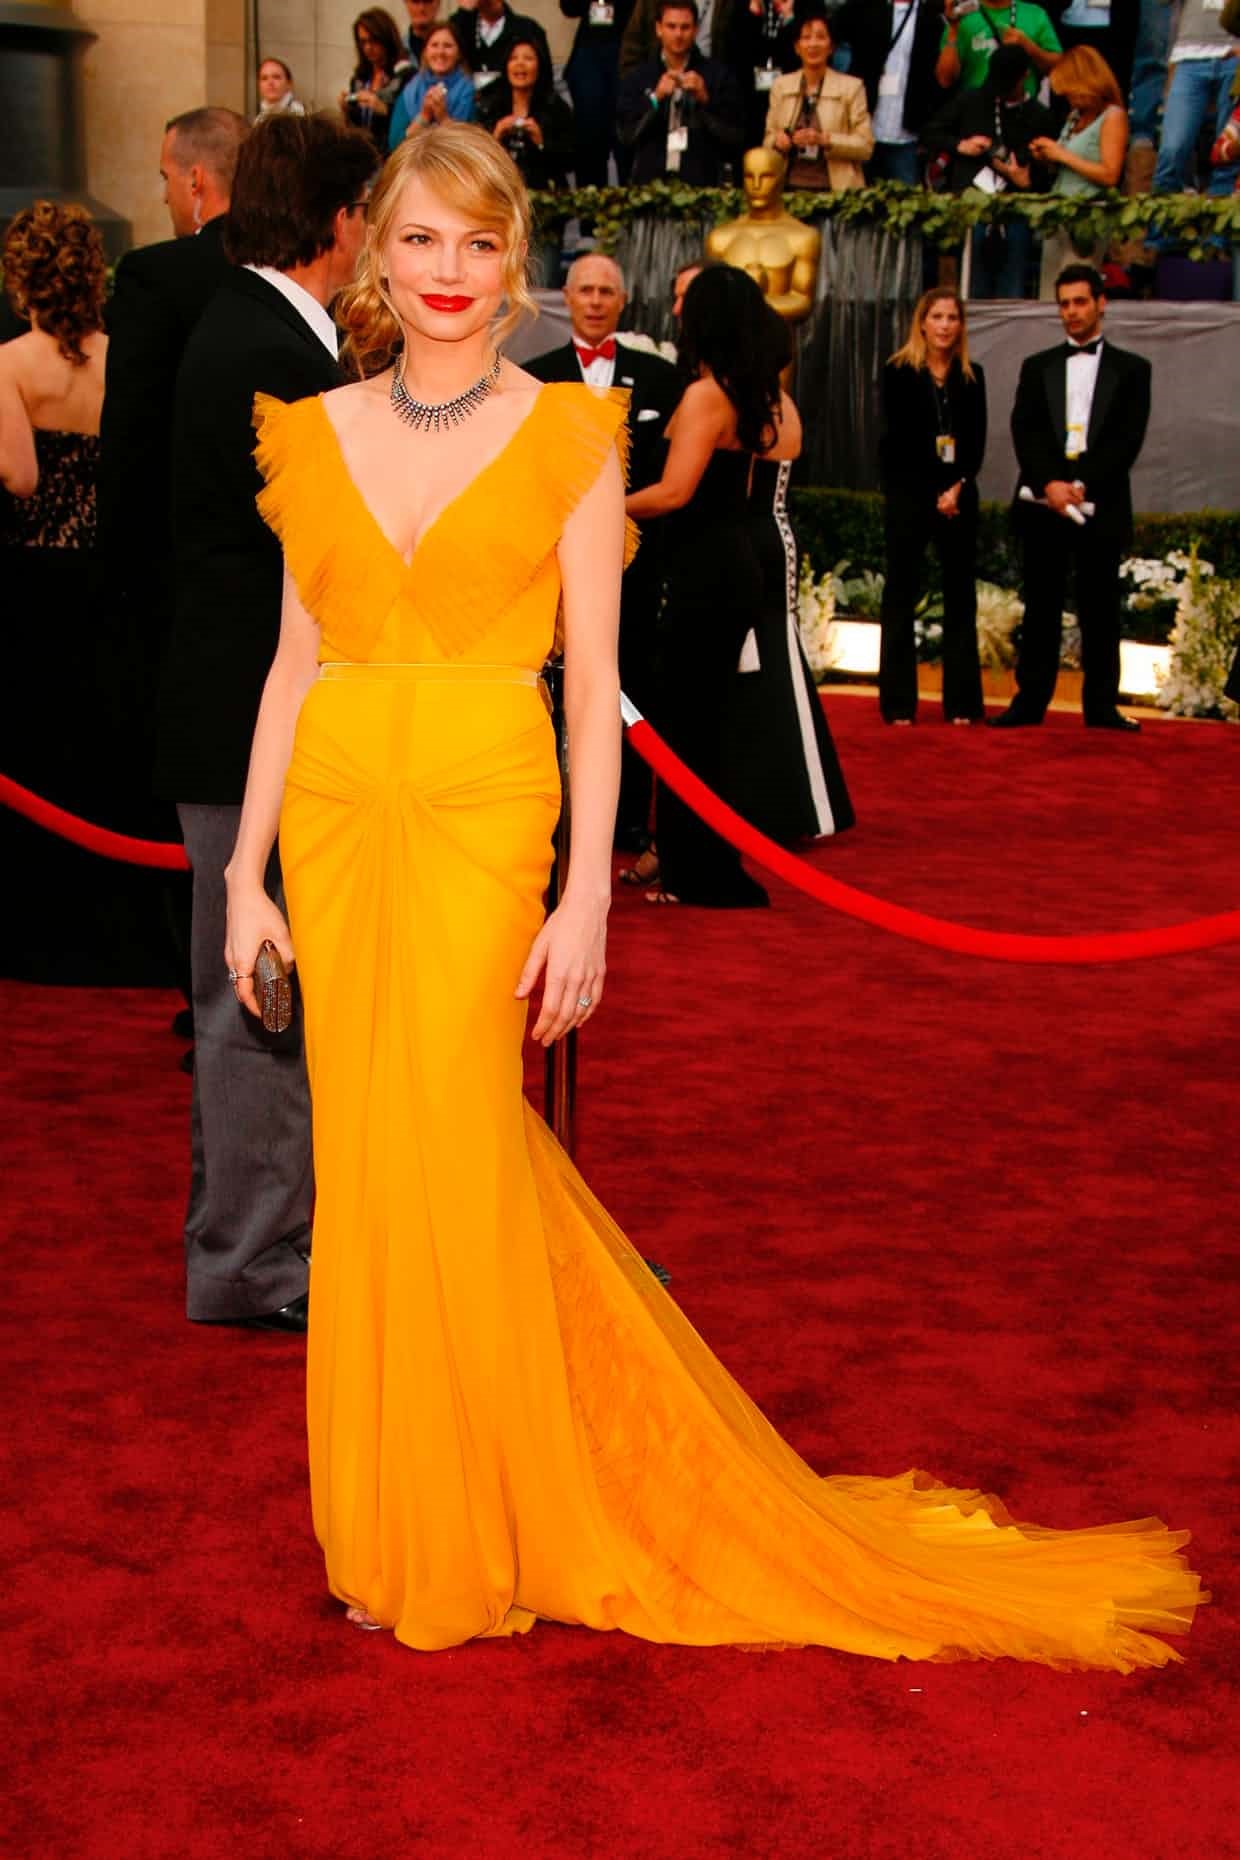 Michelle Williams - Vera Wang best oscar red carpet - michelle williams - Best Oscar Red Carpet looks over the years